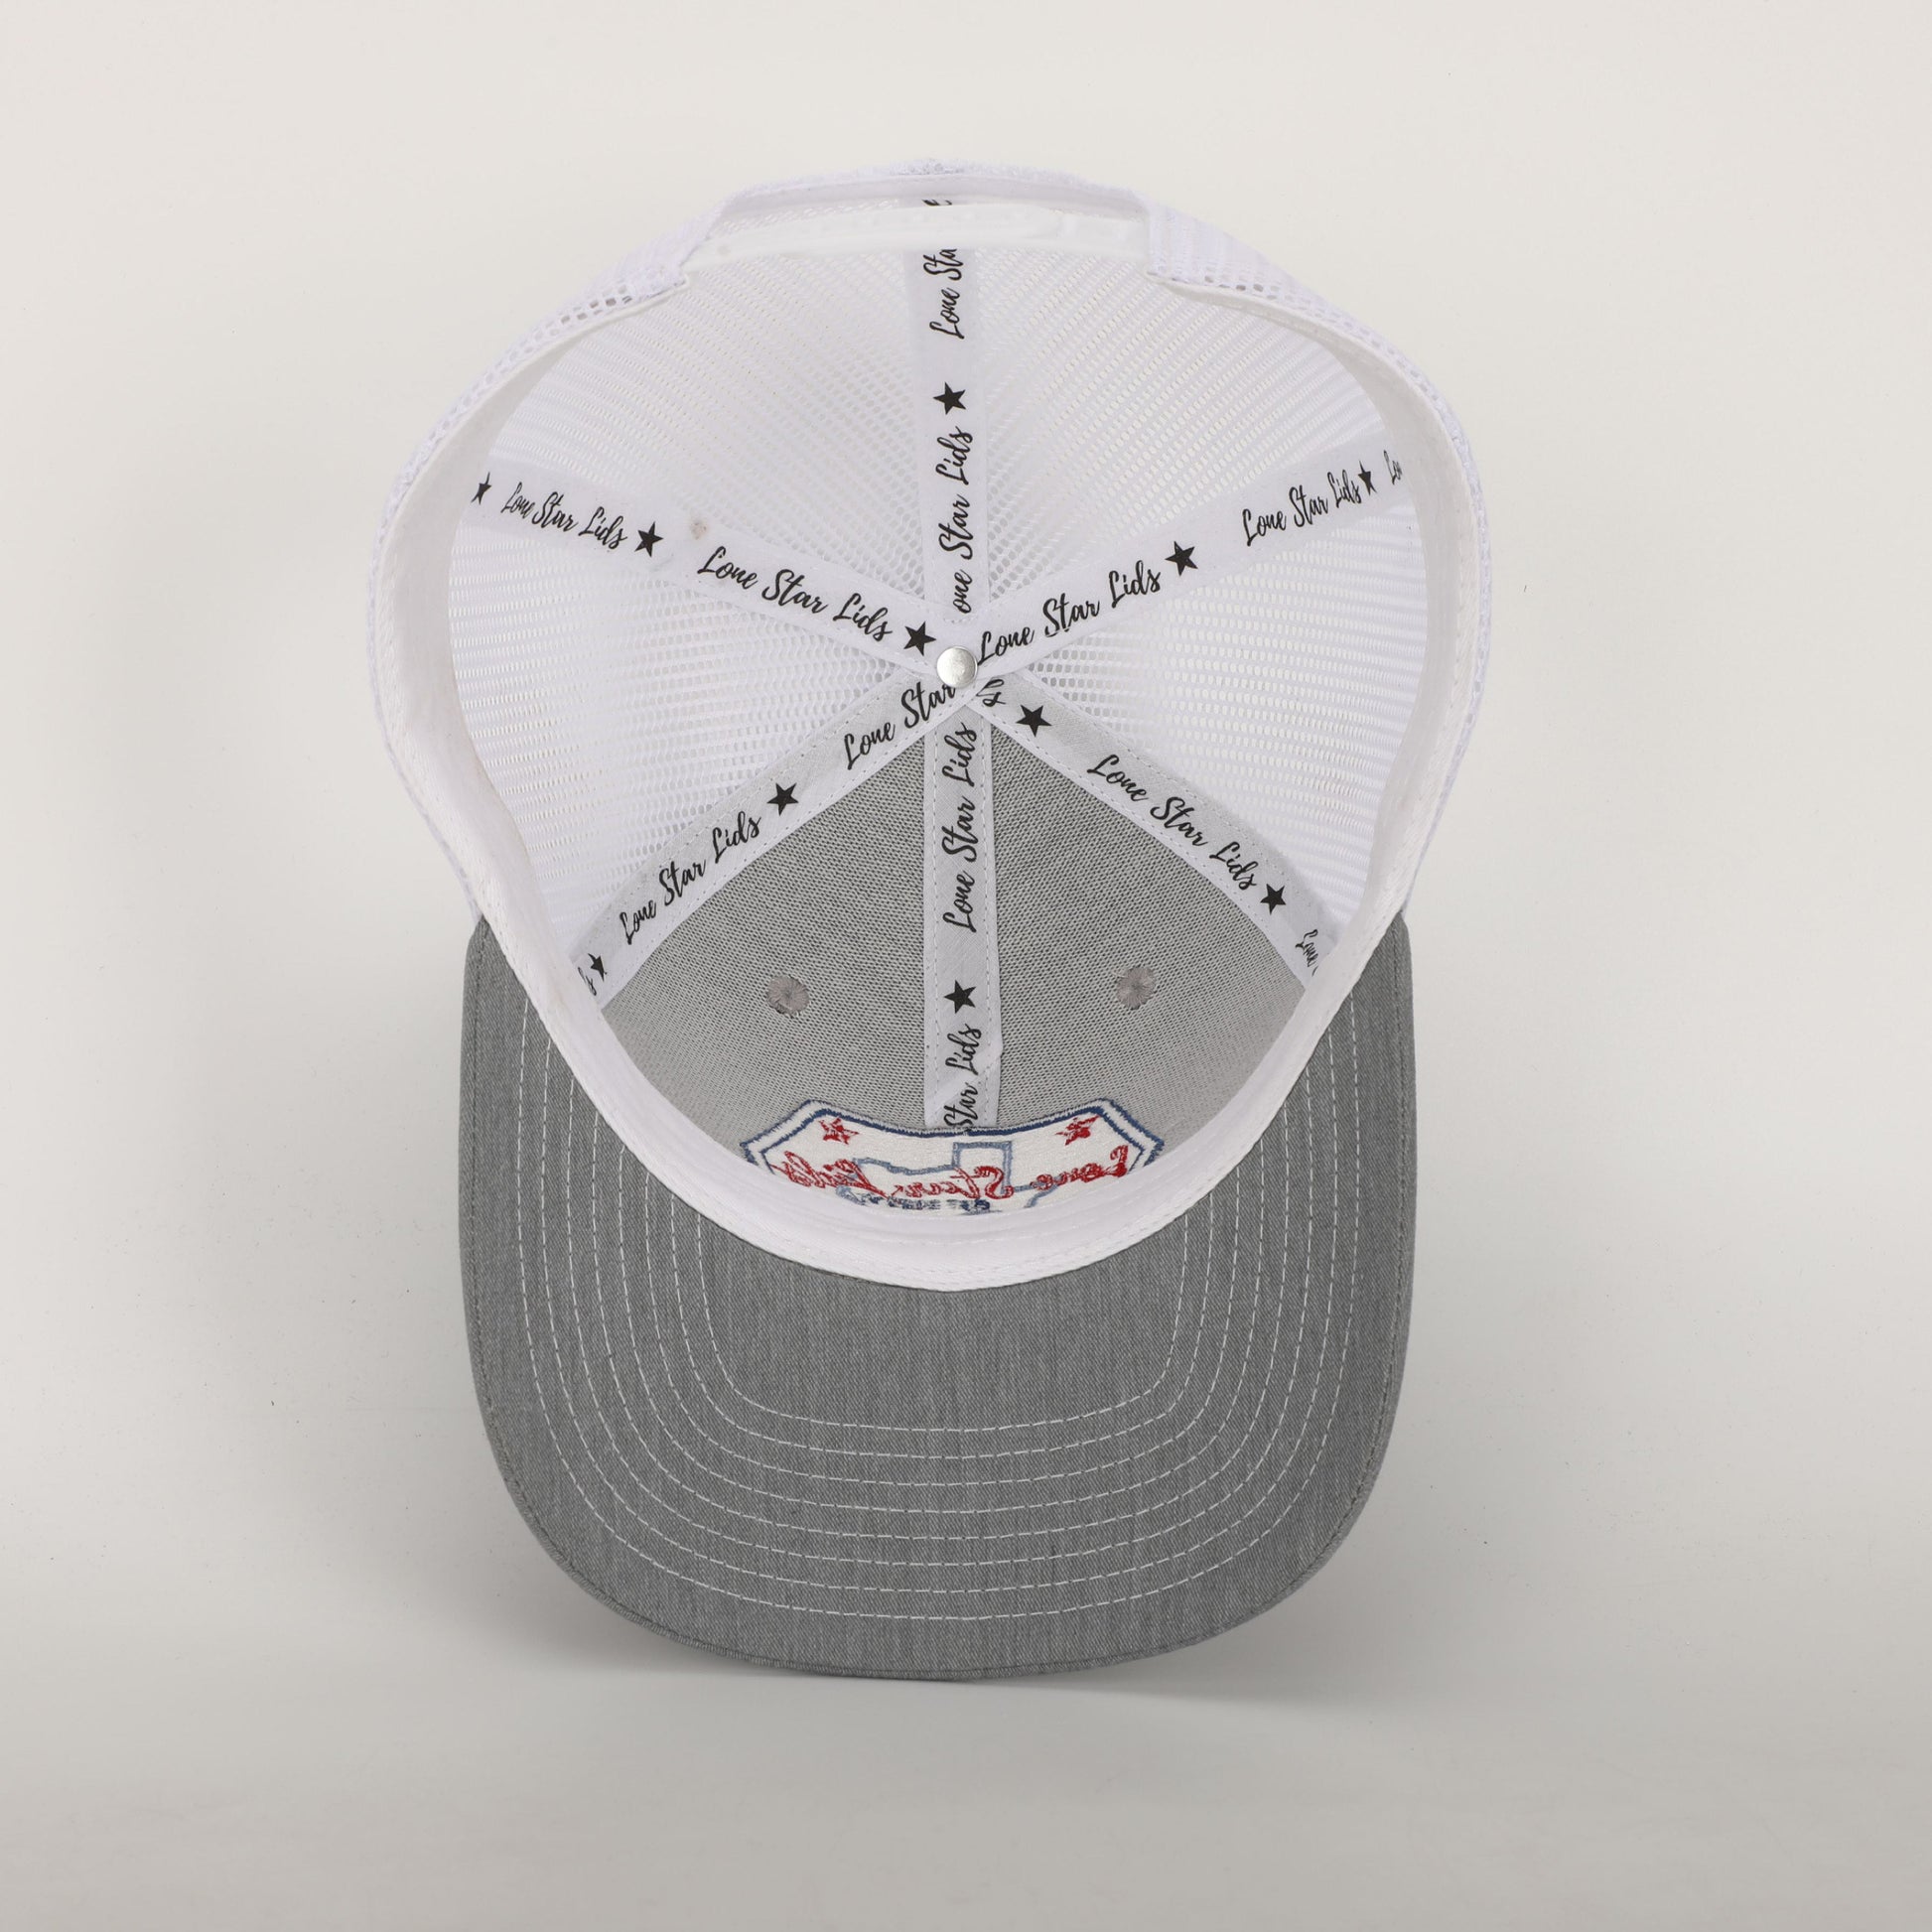 Hat Latch, The Hat Carrier and Shaper Lone Star Hatters